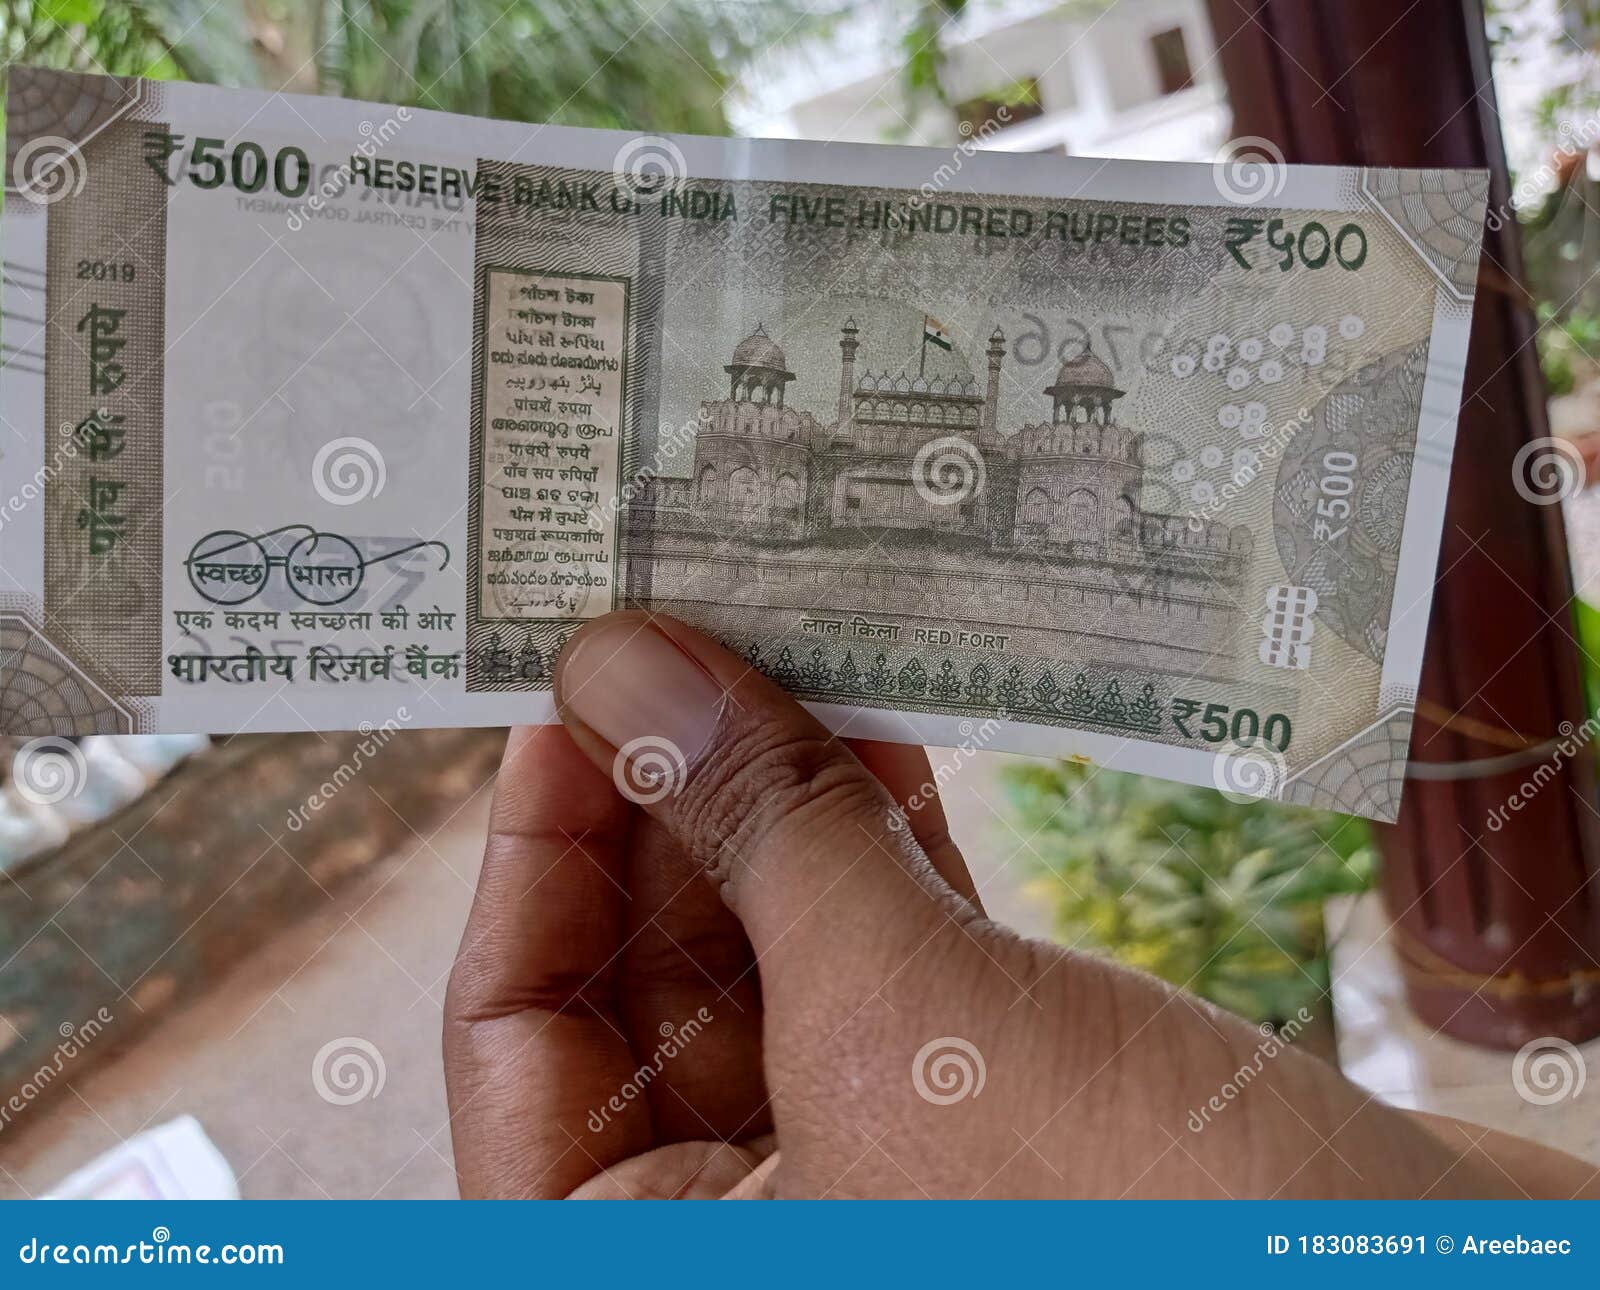 Indian currency 500 rupees stock image. Image of drawing - 183083691